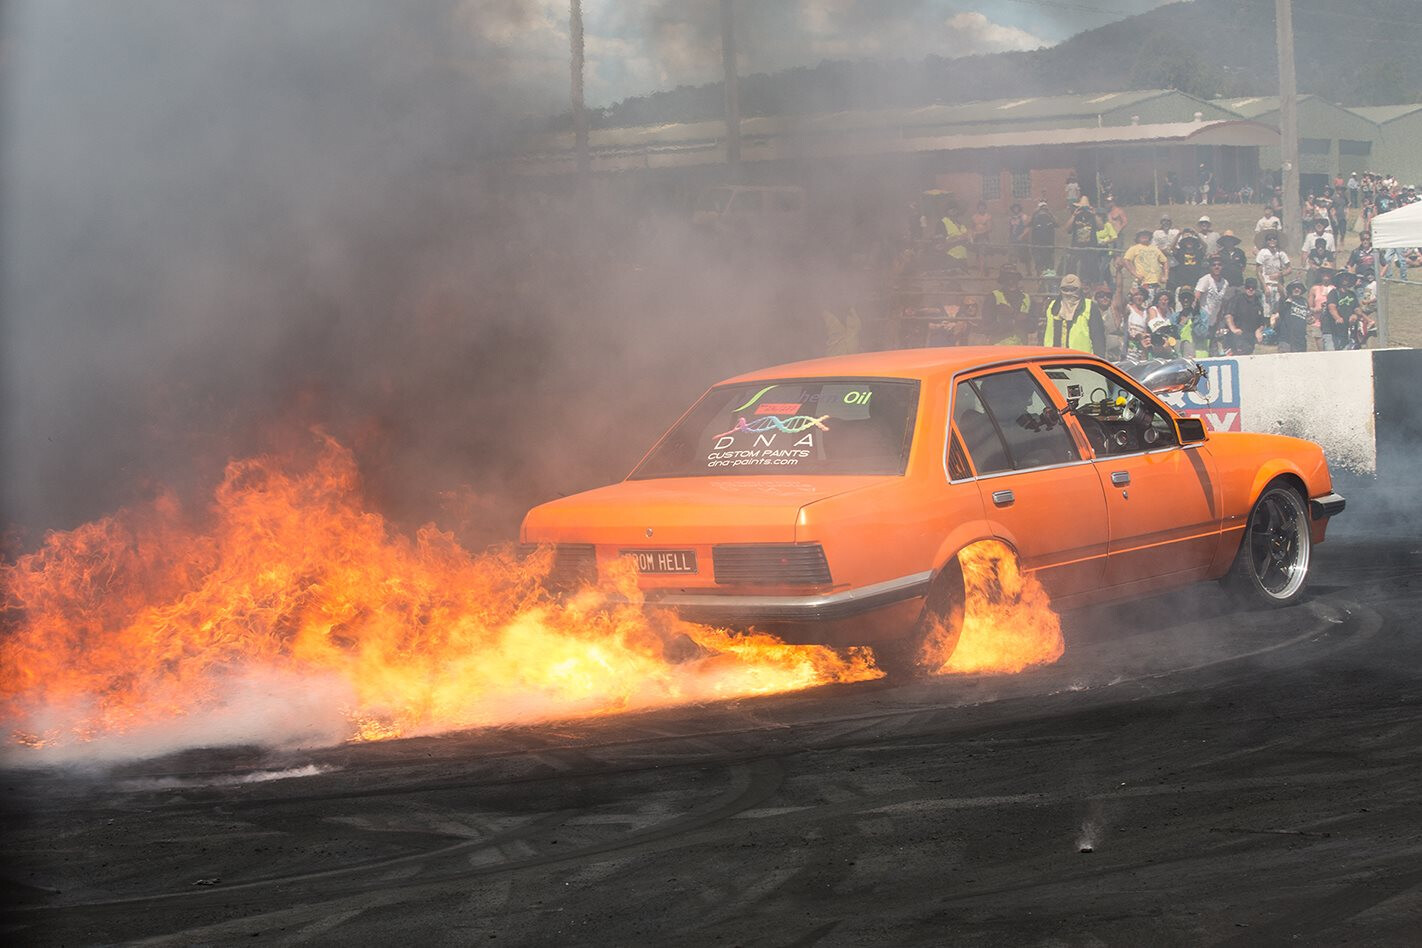 VIDEO: FROM HELL – MASSIVE BURNOUT FIRE